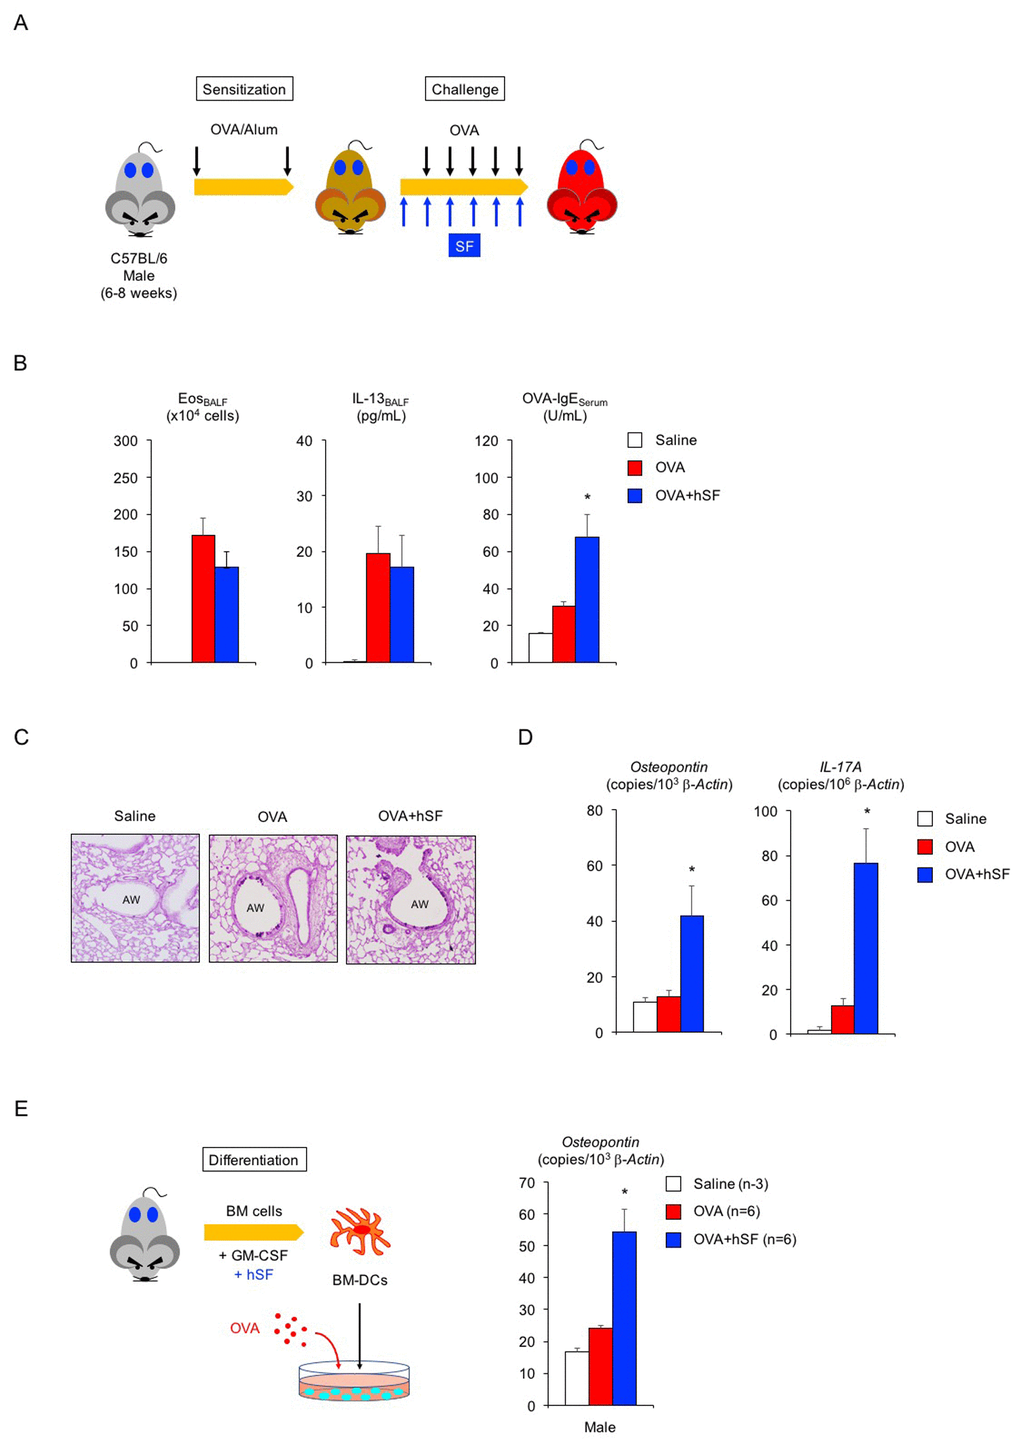 Human seminal fluid does not improve pathological changes in asthmatic male mice. (A) Schematic representation of experimental design for human seminal fluid (hSF) exposure. Young adult male mice sensitized with ovalbumin (OVA) were given hSF intraperitoneally 30 min before OVA challenge. (B) Changes in Th2-cell-driven allergic responses in asthmatic male mice exposed to hSF. White box: control group (n = 3); colored boxes: asthma groups (n = 5–7). Data are presented as means ± SEM. *P C) Representative images of PAS staining of lungs of asthmatic male mice exposed to hSF. AW: airway. (D) Transcriptional induction of osteopontin and IL-17A in lungs of asthmatic male mice exposed to hSF. White box: control group (n = 3); colored boxes: asthma groups (n = 5 - 7). Data are presented as means ± SEM. *P E) Transcriptional induction of osteopontin by hSF in antigen-stimulated BM-DCs of 2-month-old male mice. White box: control group (n = 3); colored boxes: OVA-stimulated groups (n = 6 each). Data are presented as means ± SEM. *P 